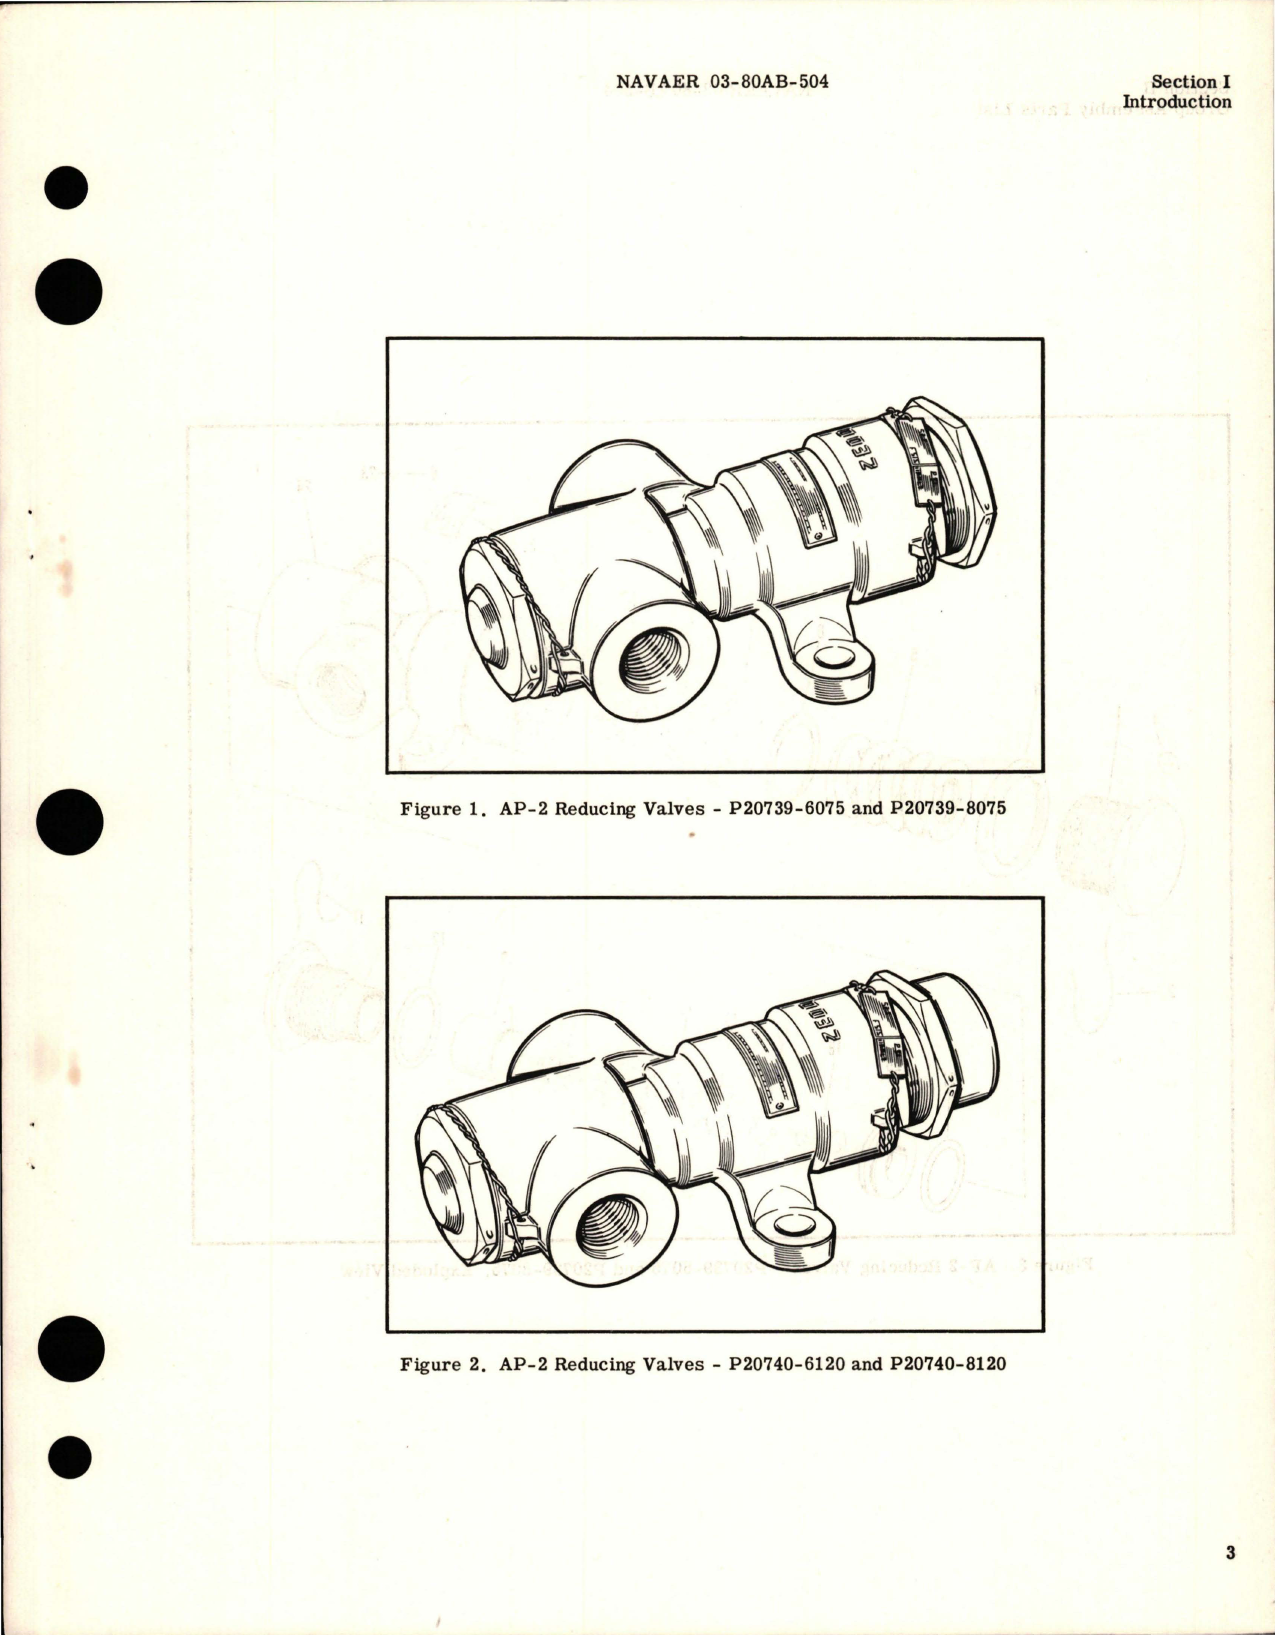 Sample page 5 from AirCorps Library document: Illustrated Parts Breakdown for Reducing Valve 